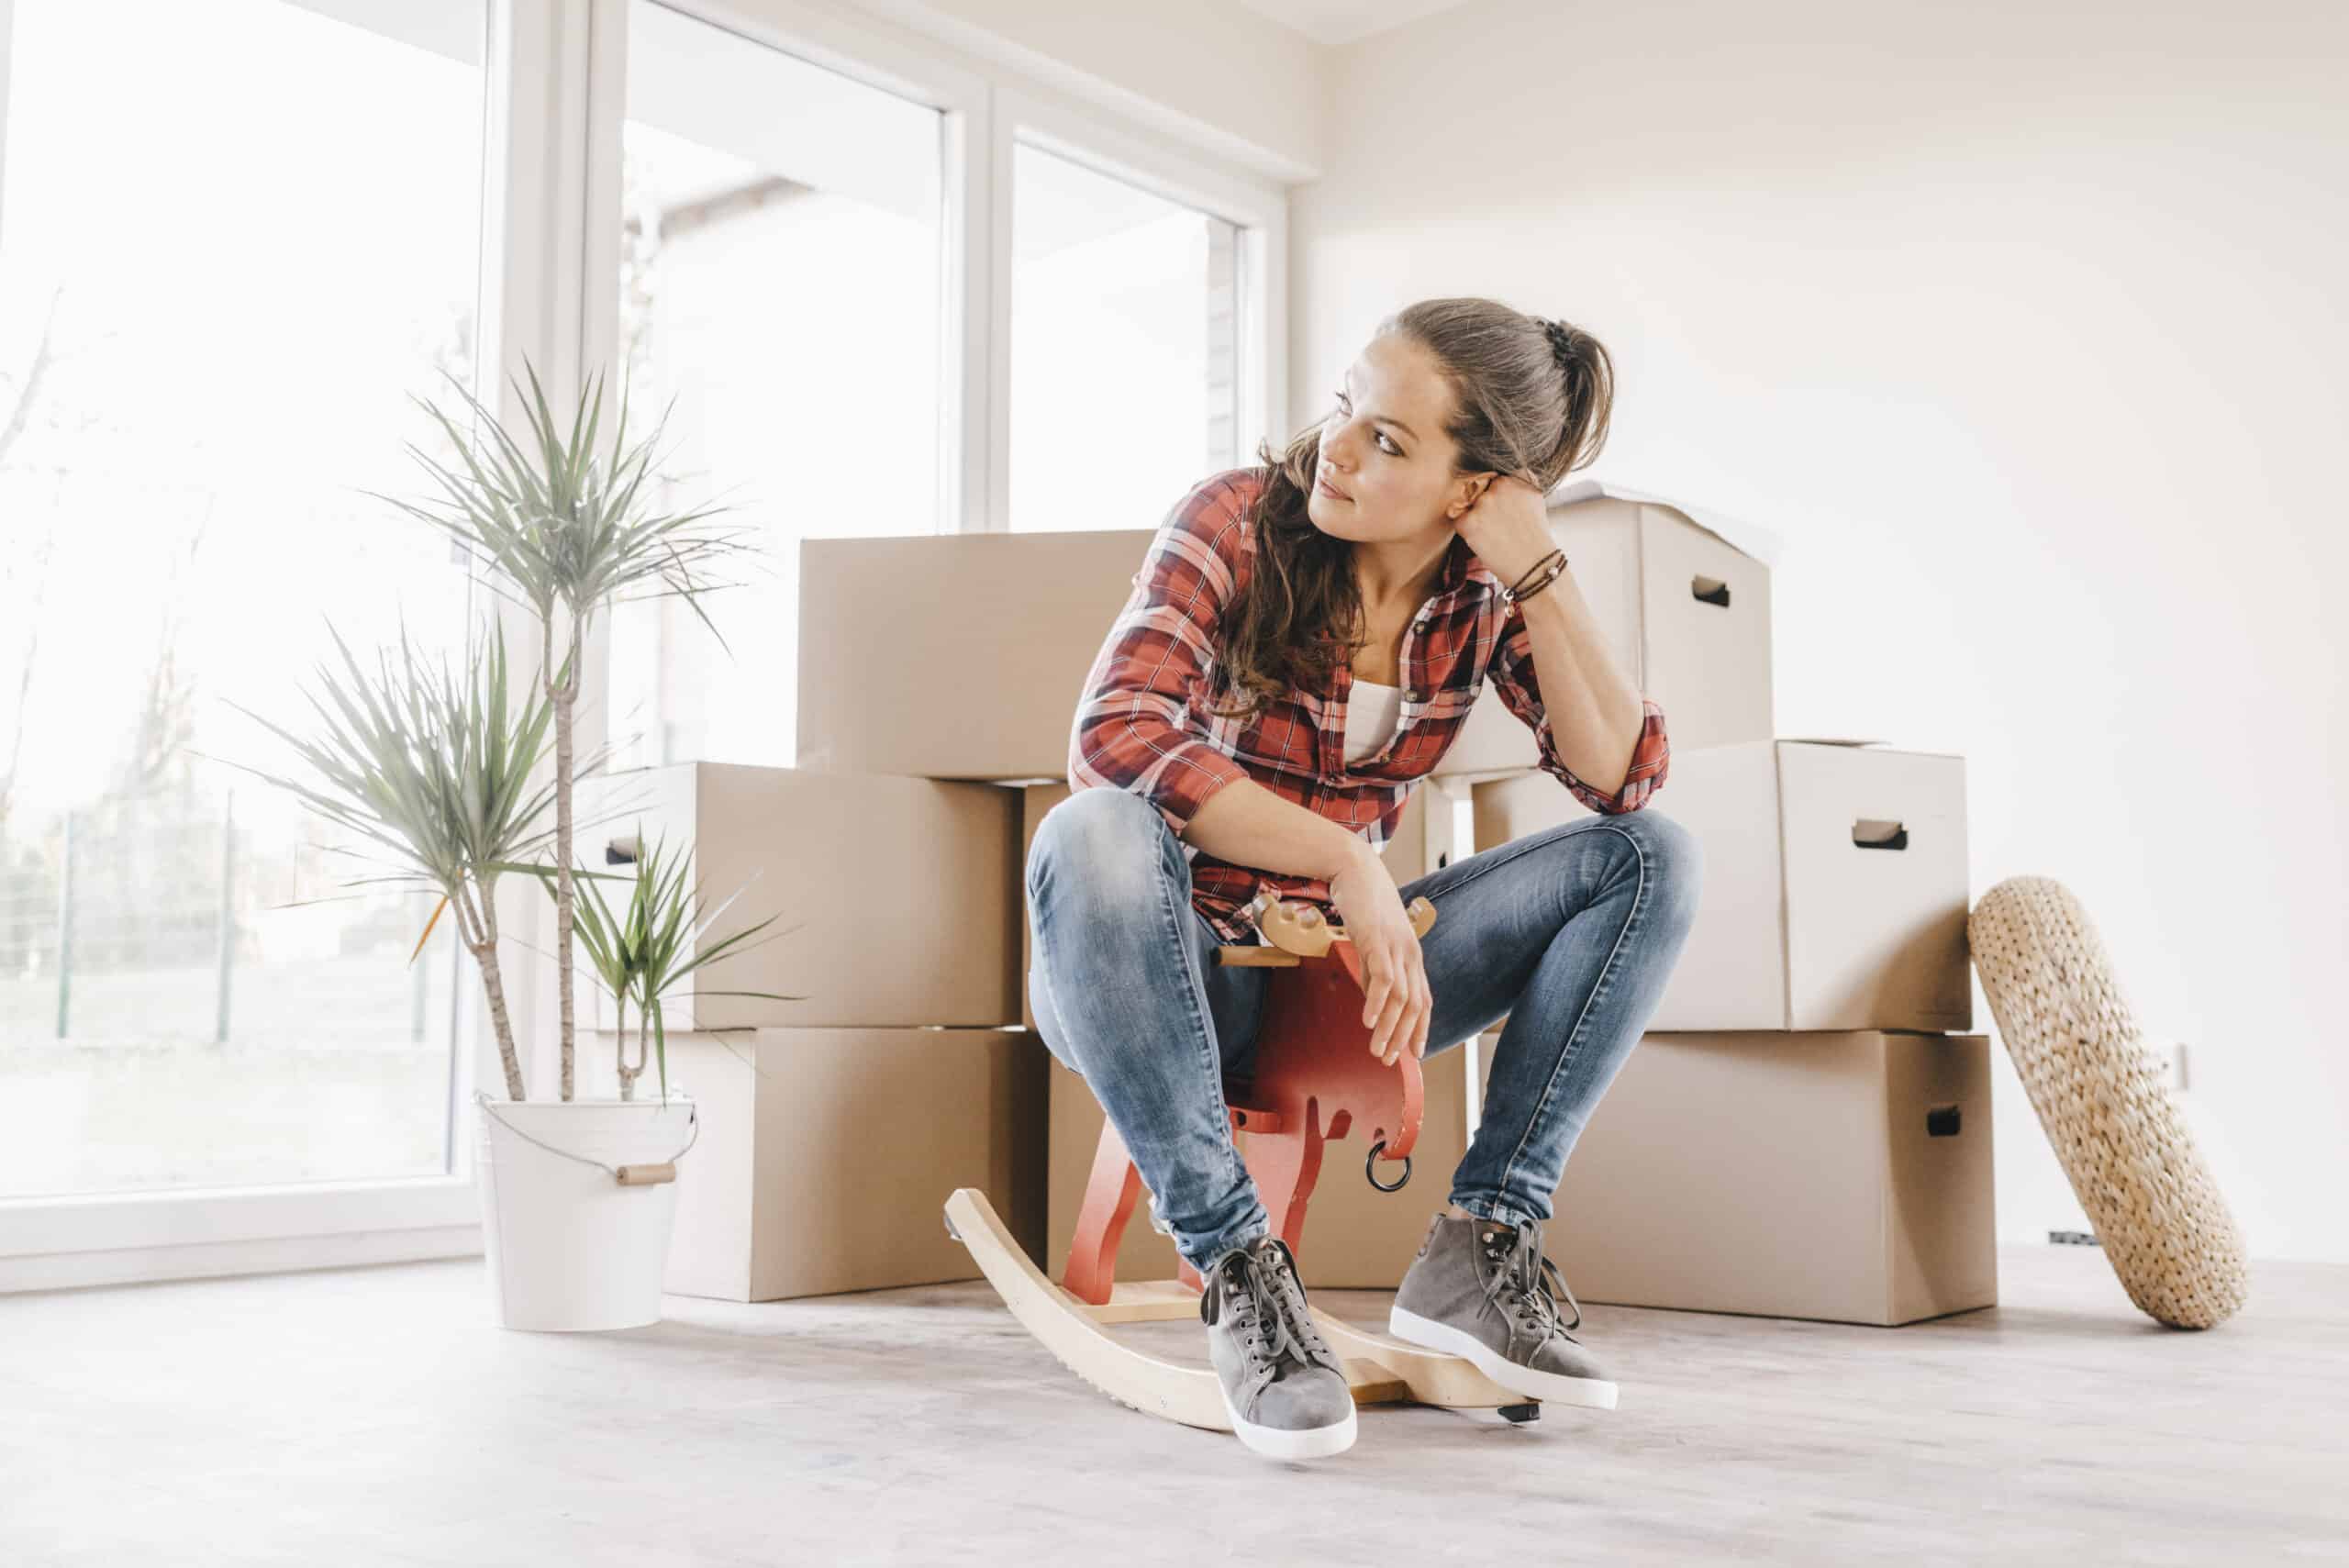 A woman sitting on a rocking chair in front of moving boxes, symbolizing the final steps in the home buying process.